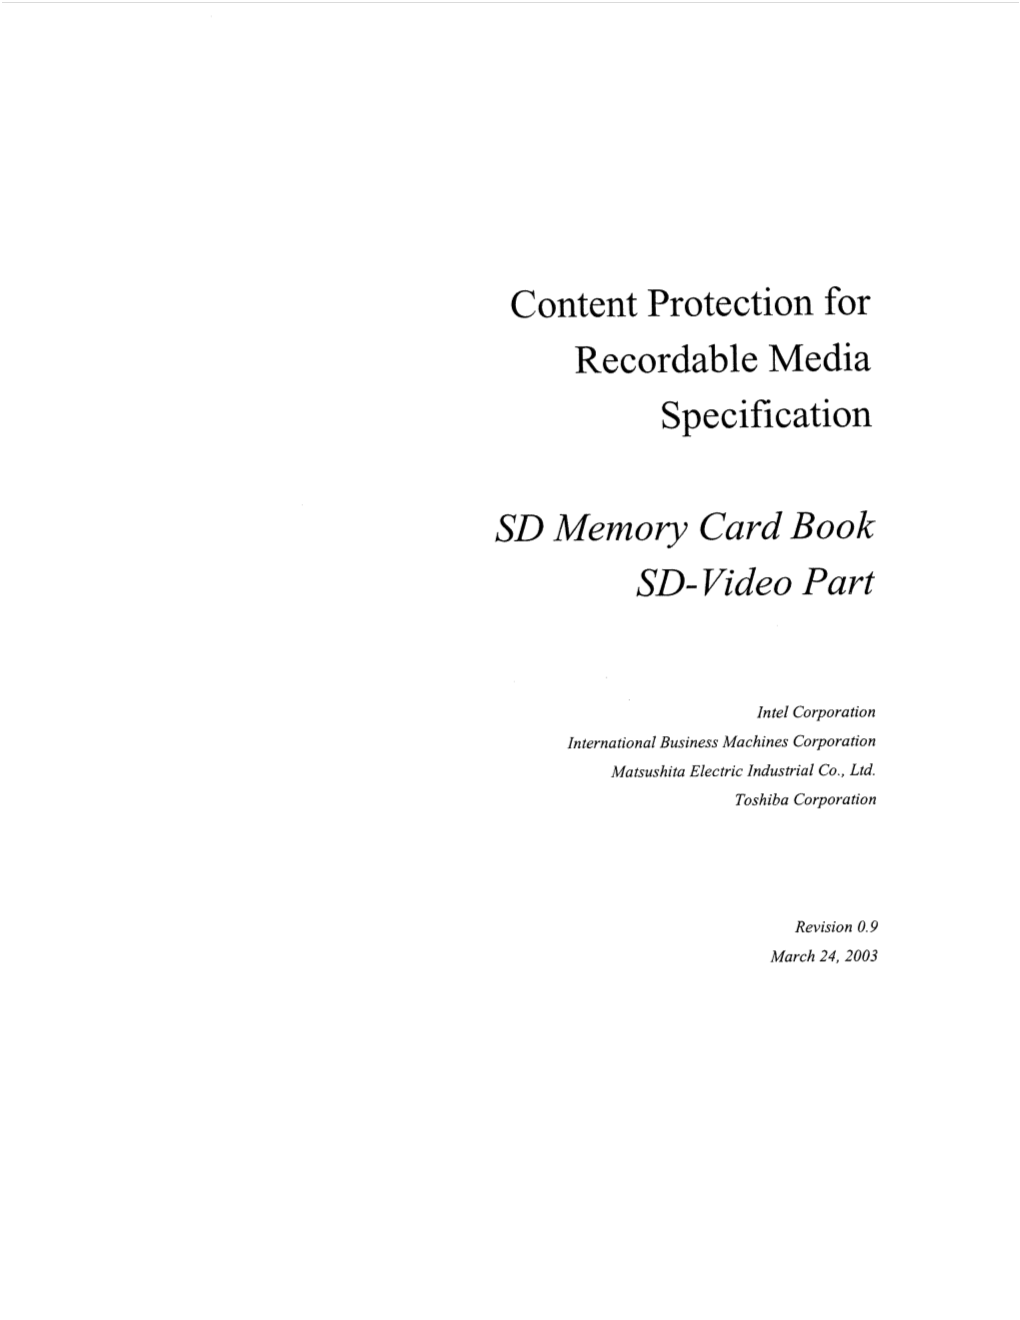 Content Protection for Recordable Media Specification SD Memory